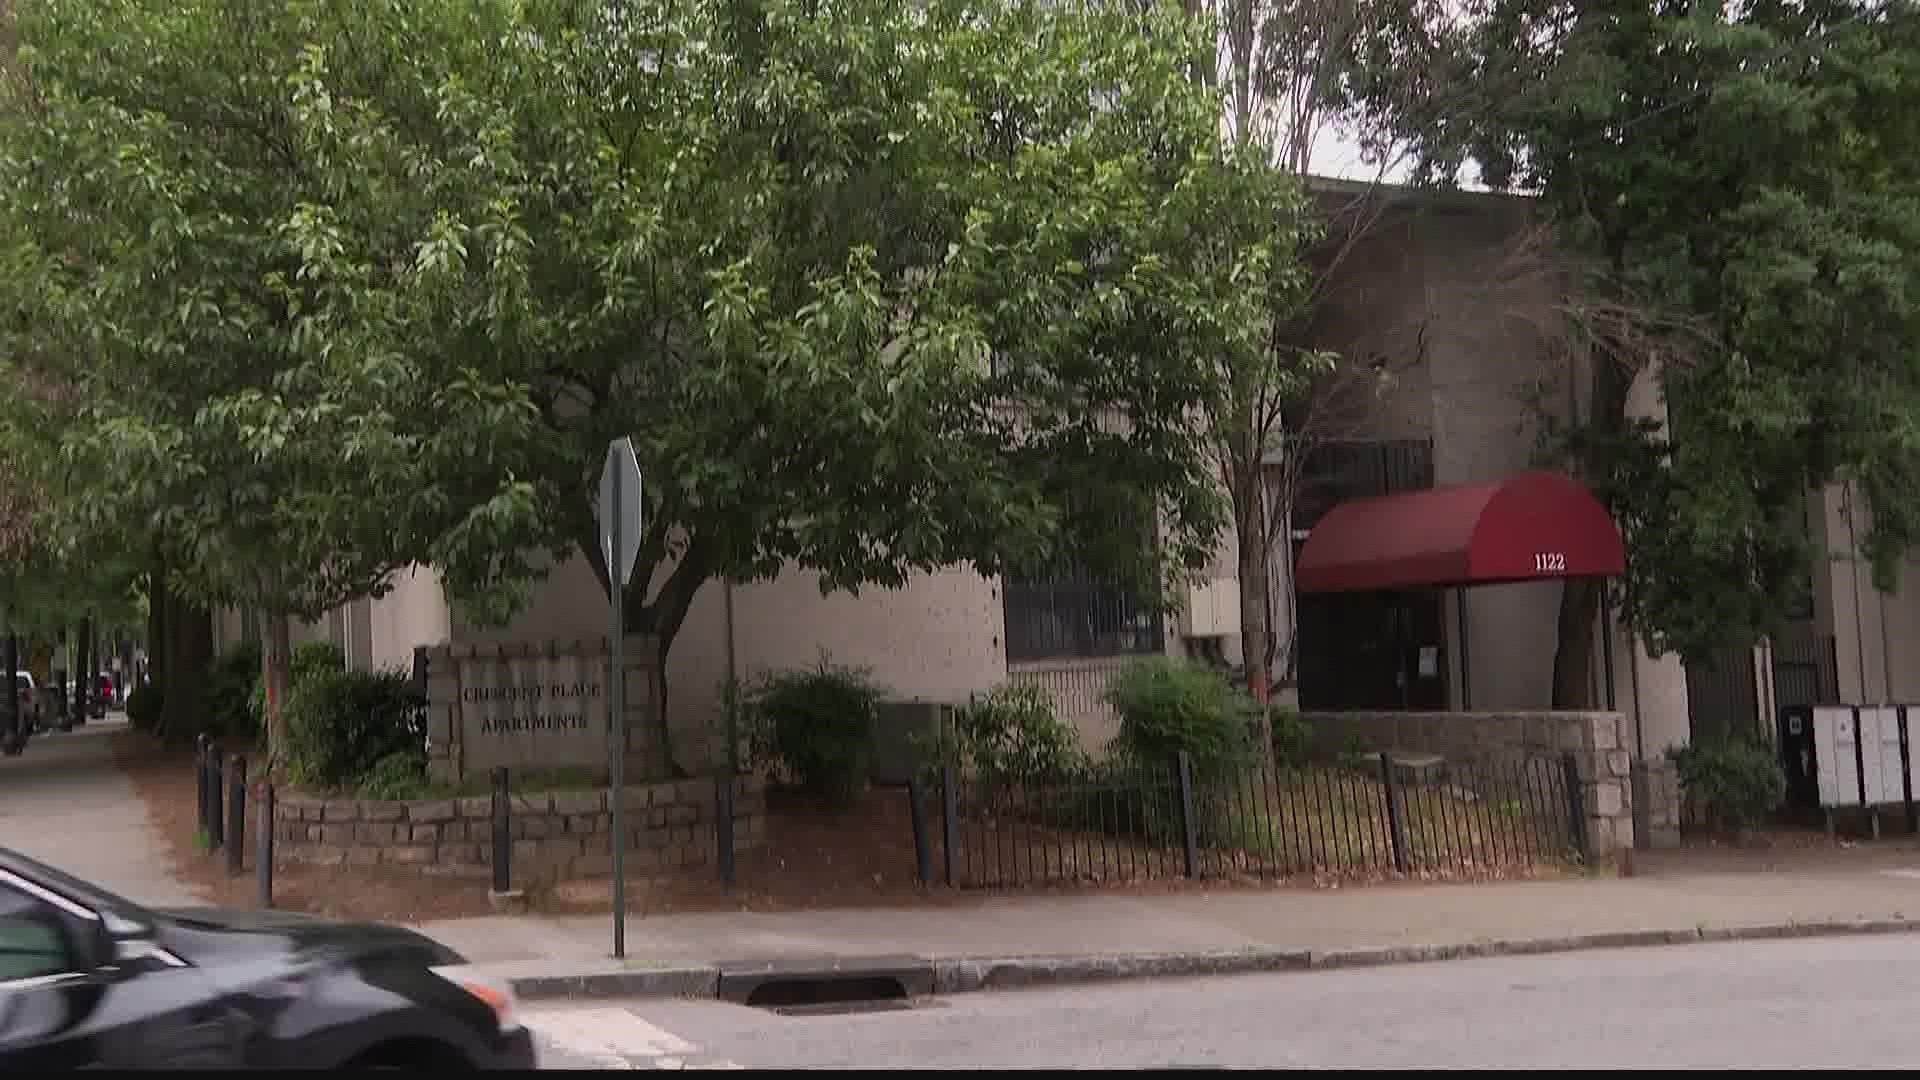 Residents at Crescent Place Apartments have until July 1 to move out according to management.